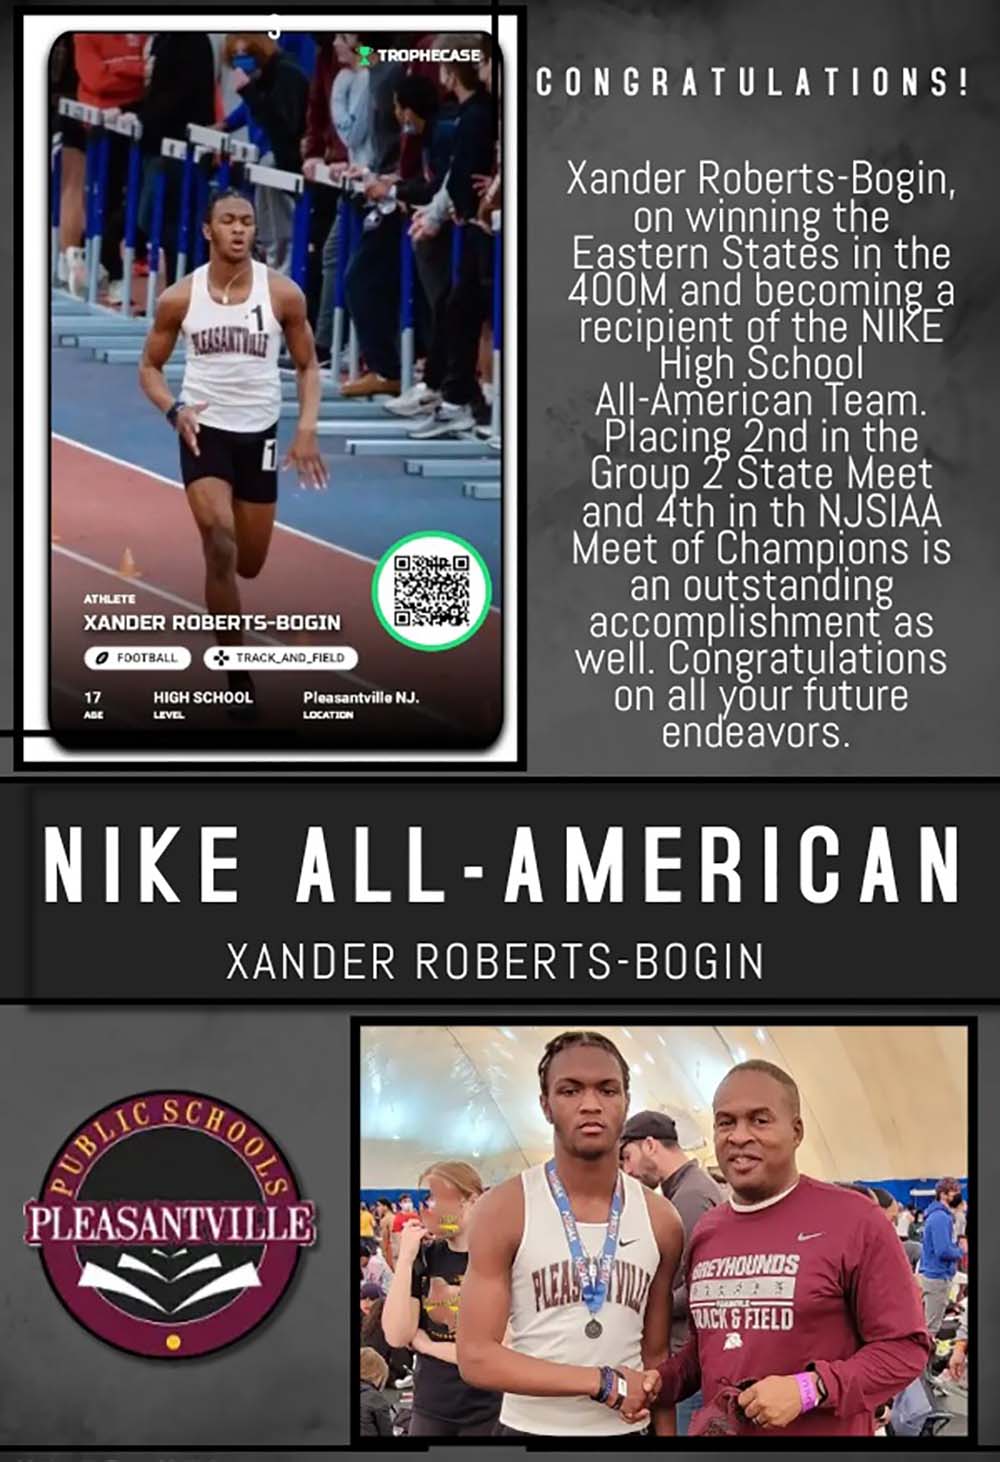 Nke ALL - AMERICAN Congratulations! Xander Roberts-Bogin Xander Roberts-Bogin, on winning the Eastern State in the 400M and becoming a recipient of the NIKE High School  All-American Team. Placing 2nd in the Group 2 State Meet and 4th in the NJSIAA Meet of Champions is an outstanding accomplishment as well. Congratulations on all your future endeavors. 